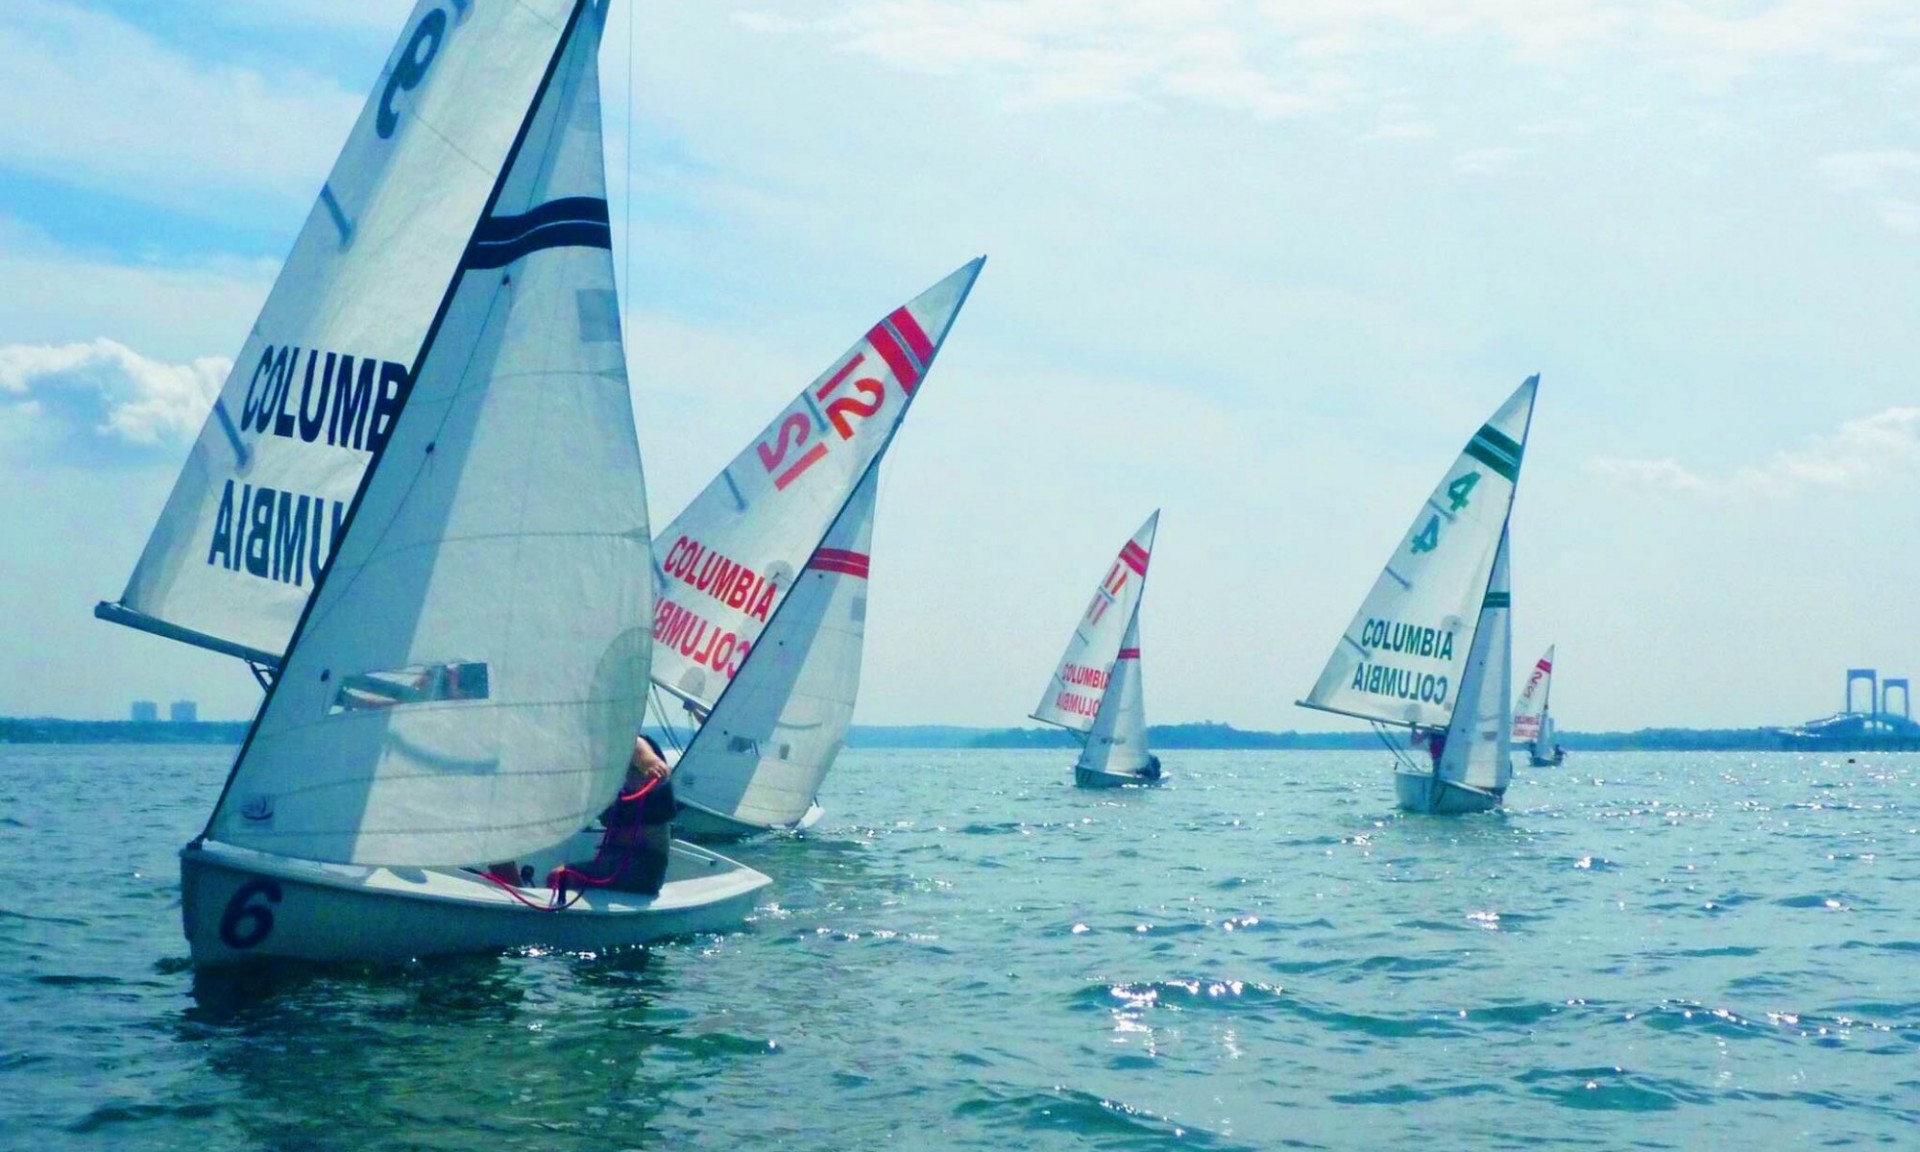 A group of sailboats from Columbia's sailing club move through the water.